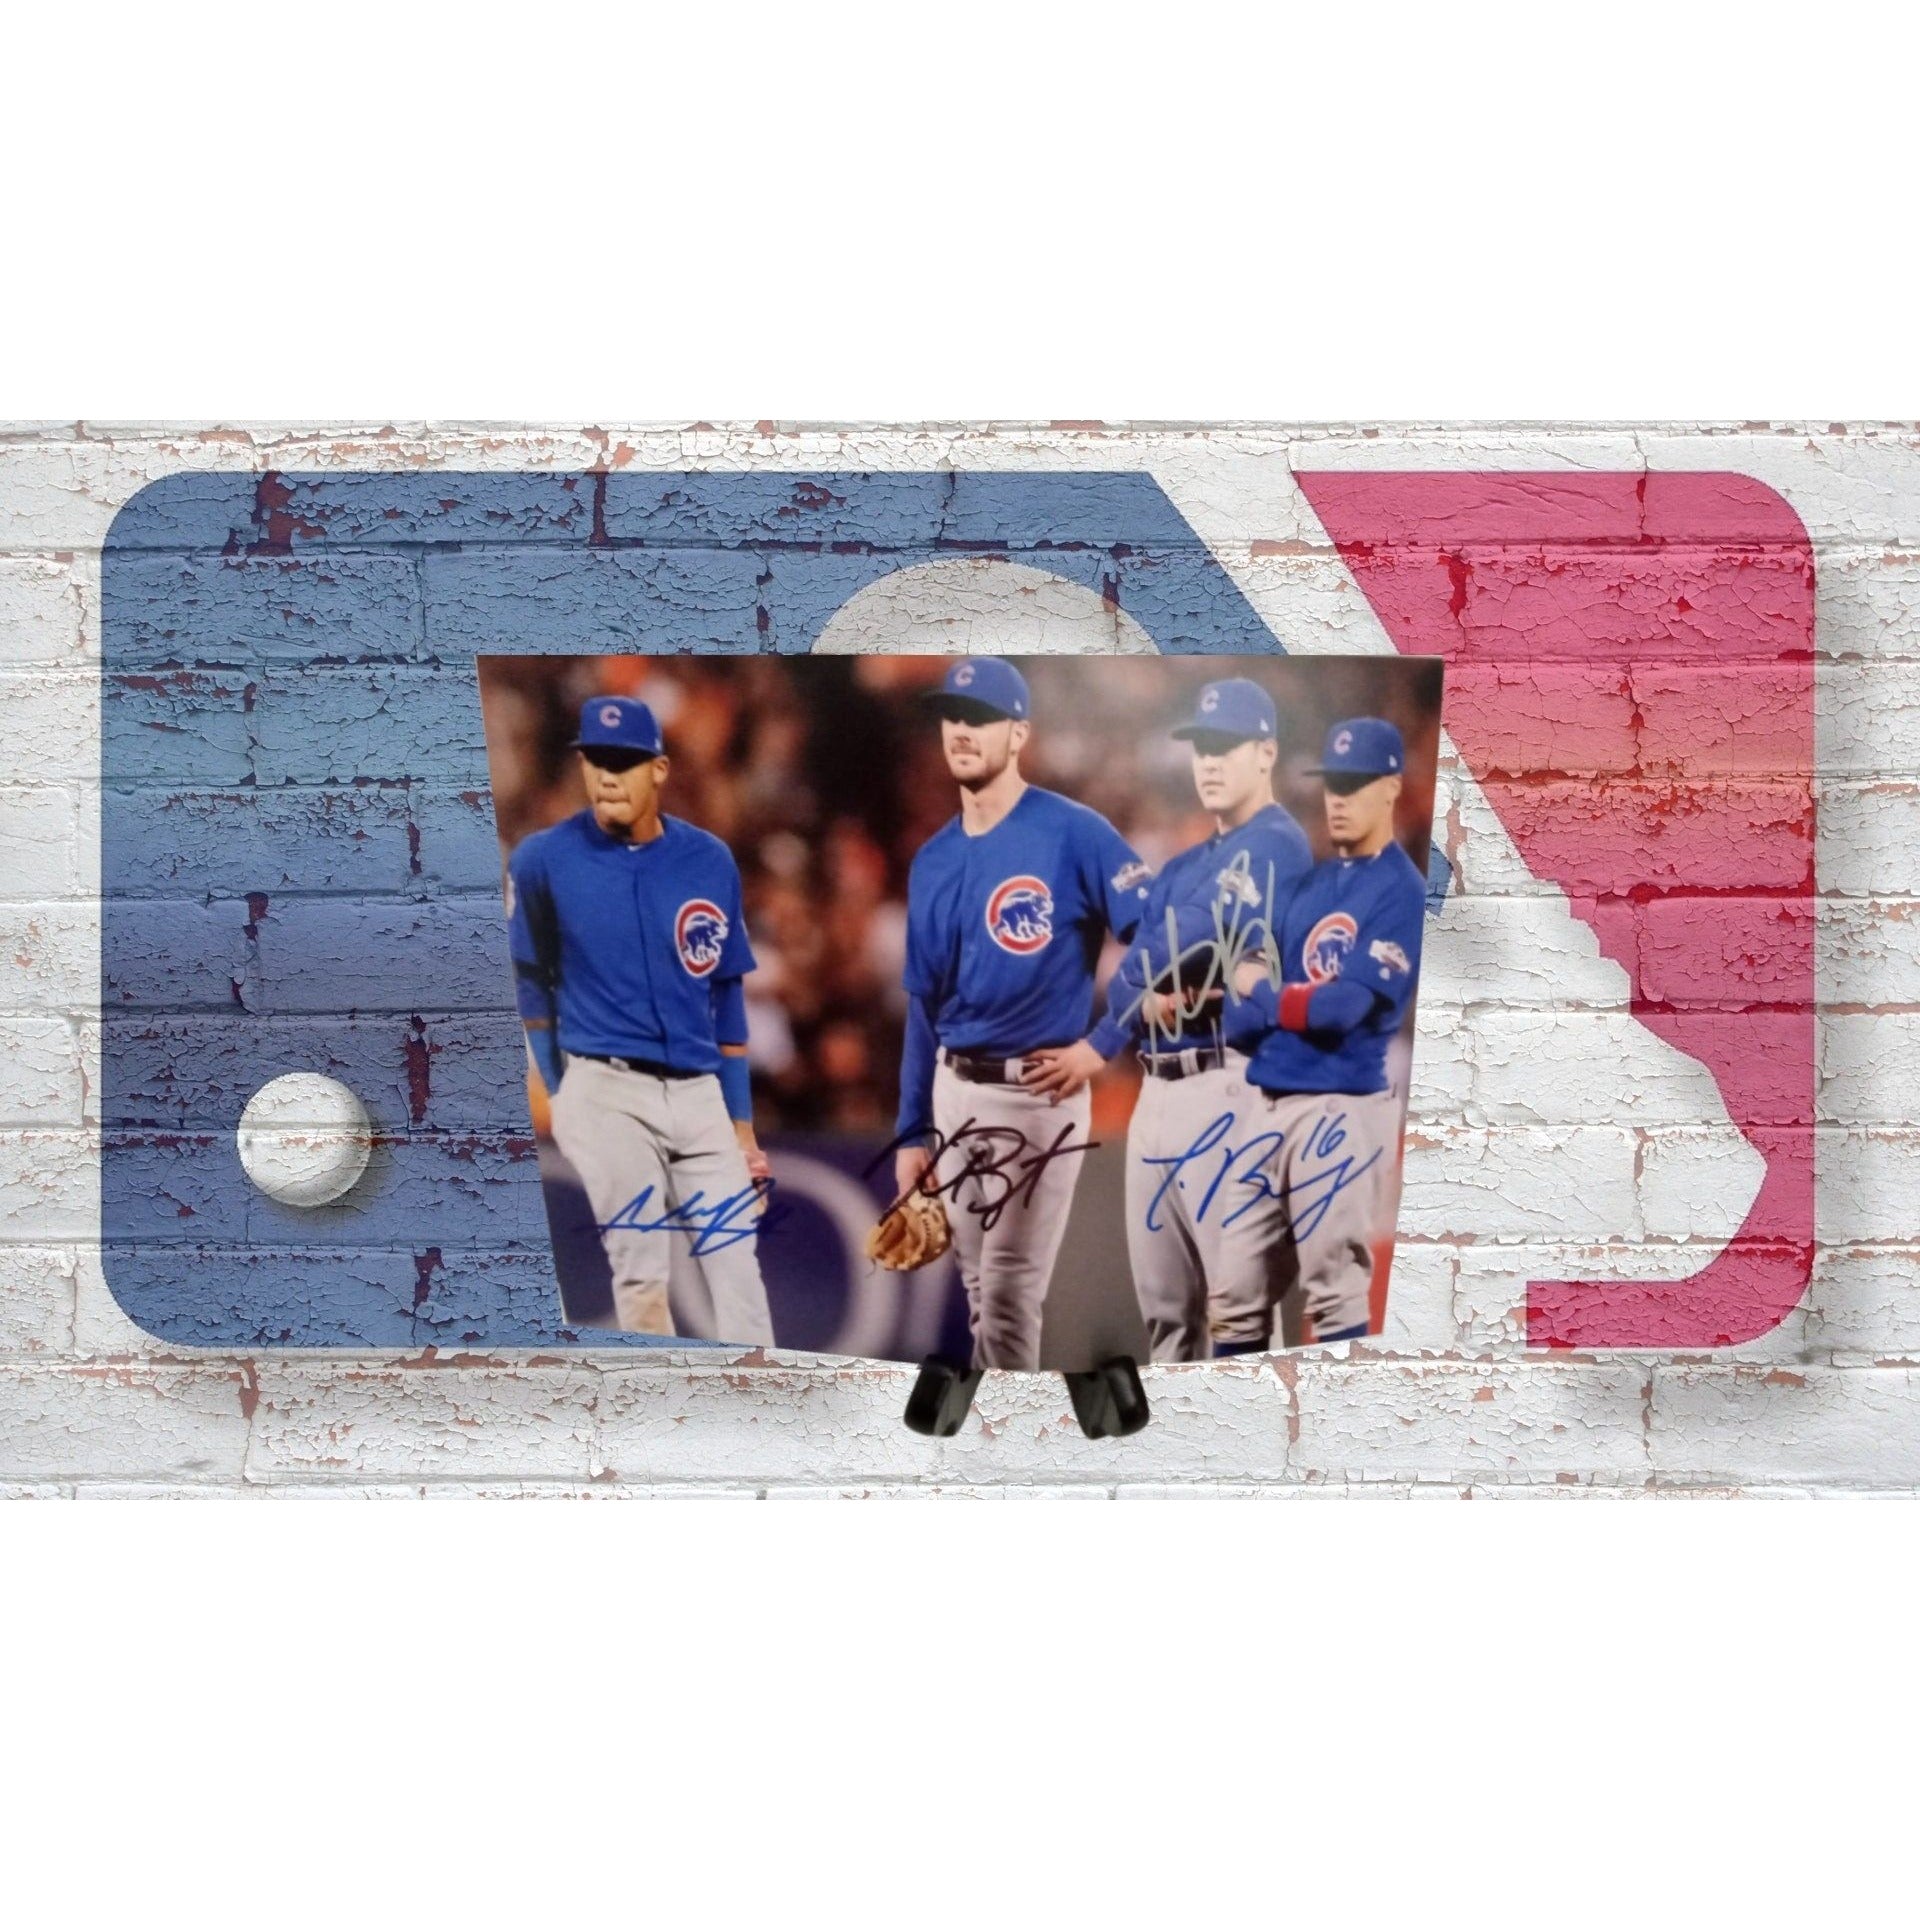 Anthony Rizzo Javi Baez Kris Bryant Addison Russell 8 by 10 signed photo